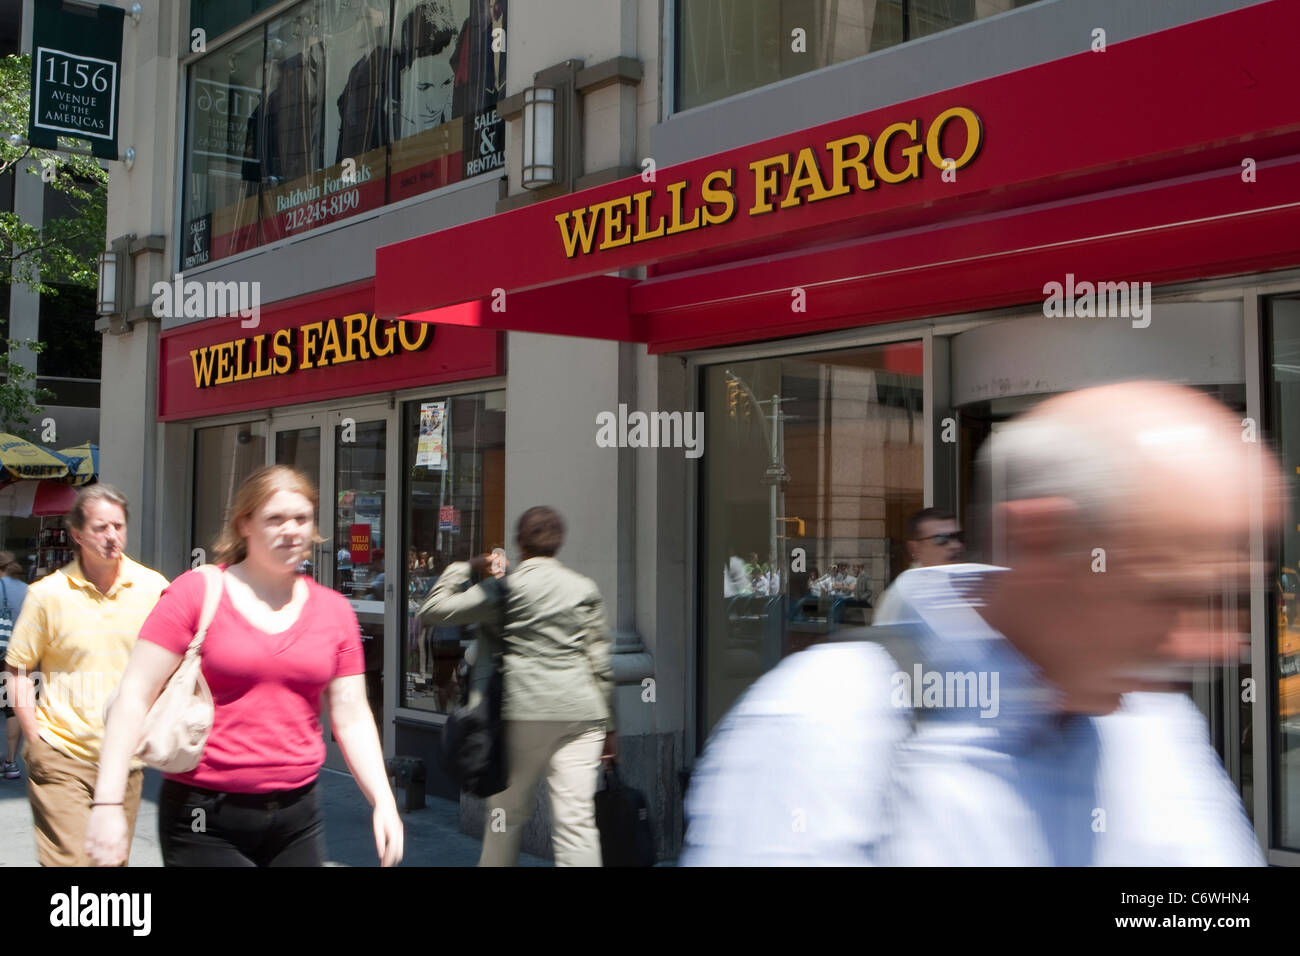 A Wells Fargo branch is pictured in New York City, NY Tuesday August 2, 2011. Stock Photo